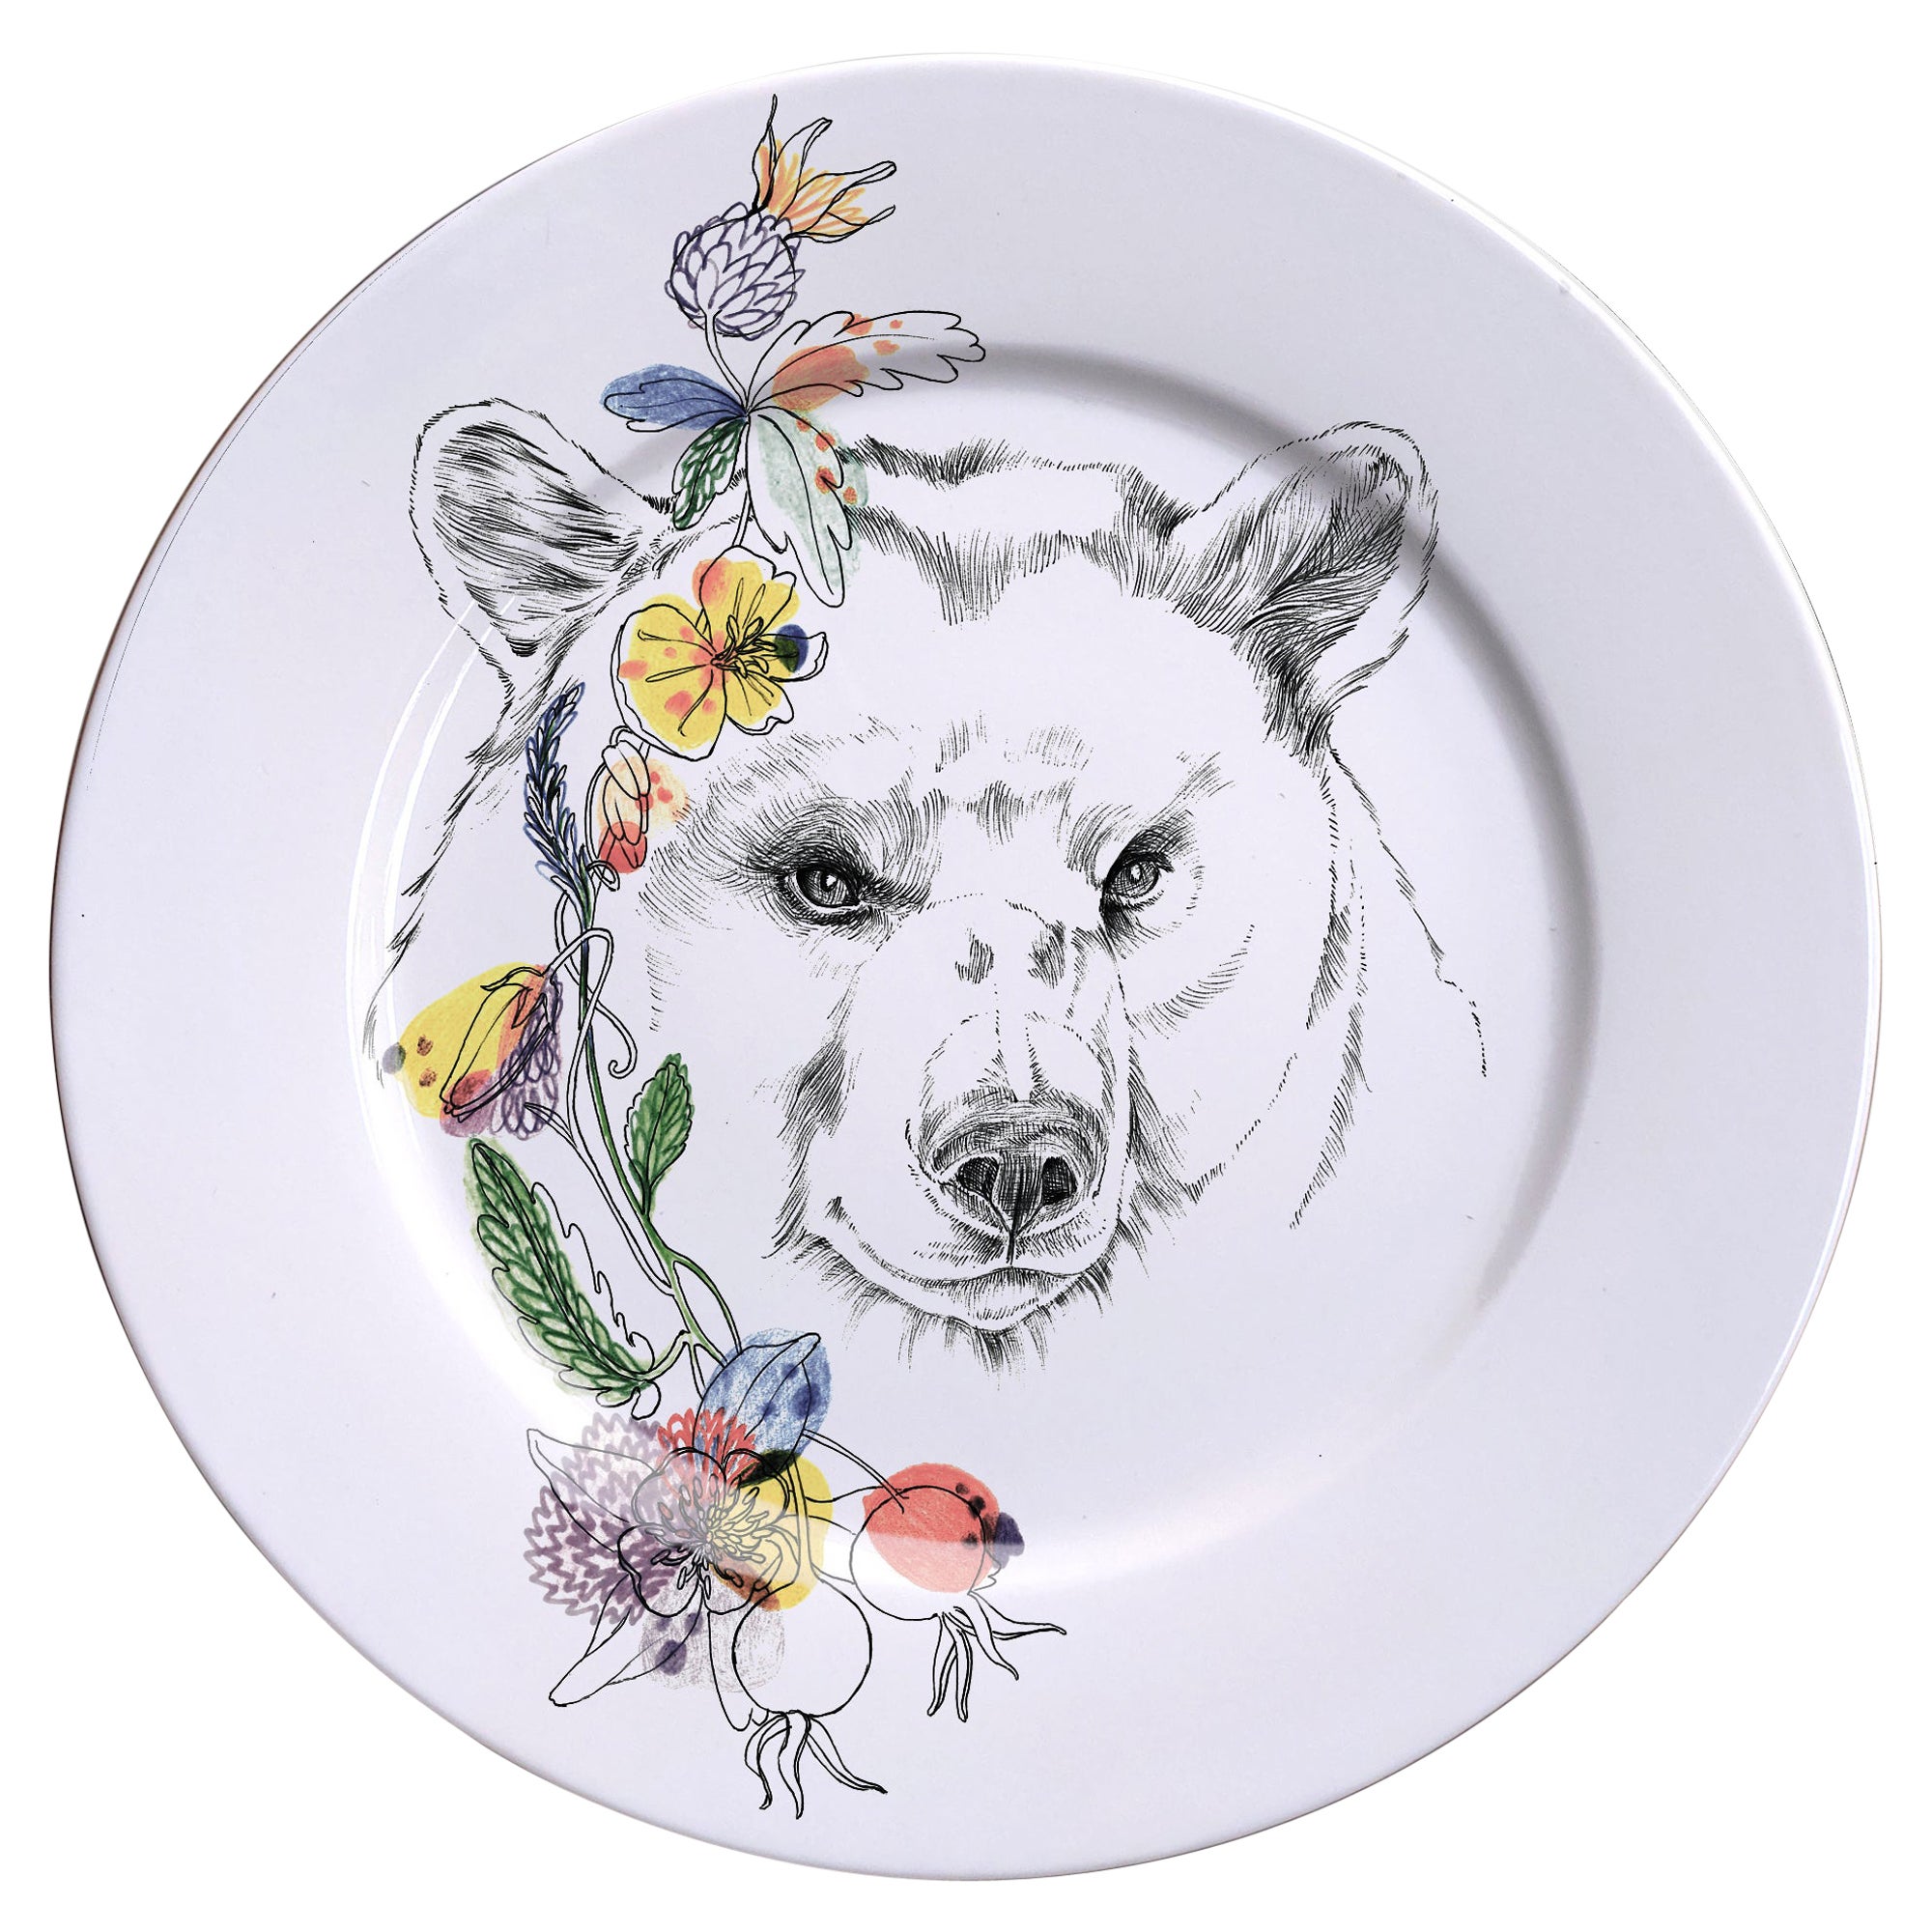 Ode to the Woods, Contemporary Porcelain Dessert Plate with Bear and Flowers For Sale